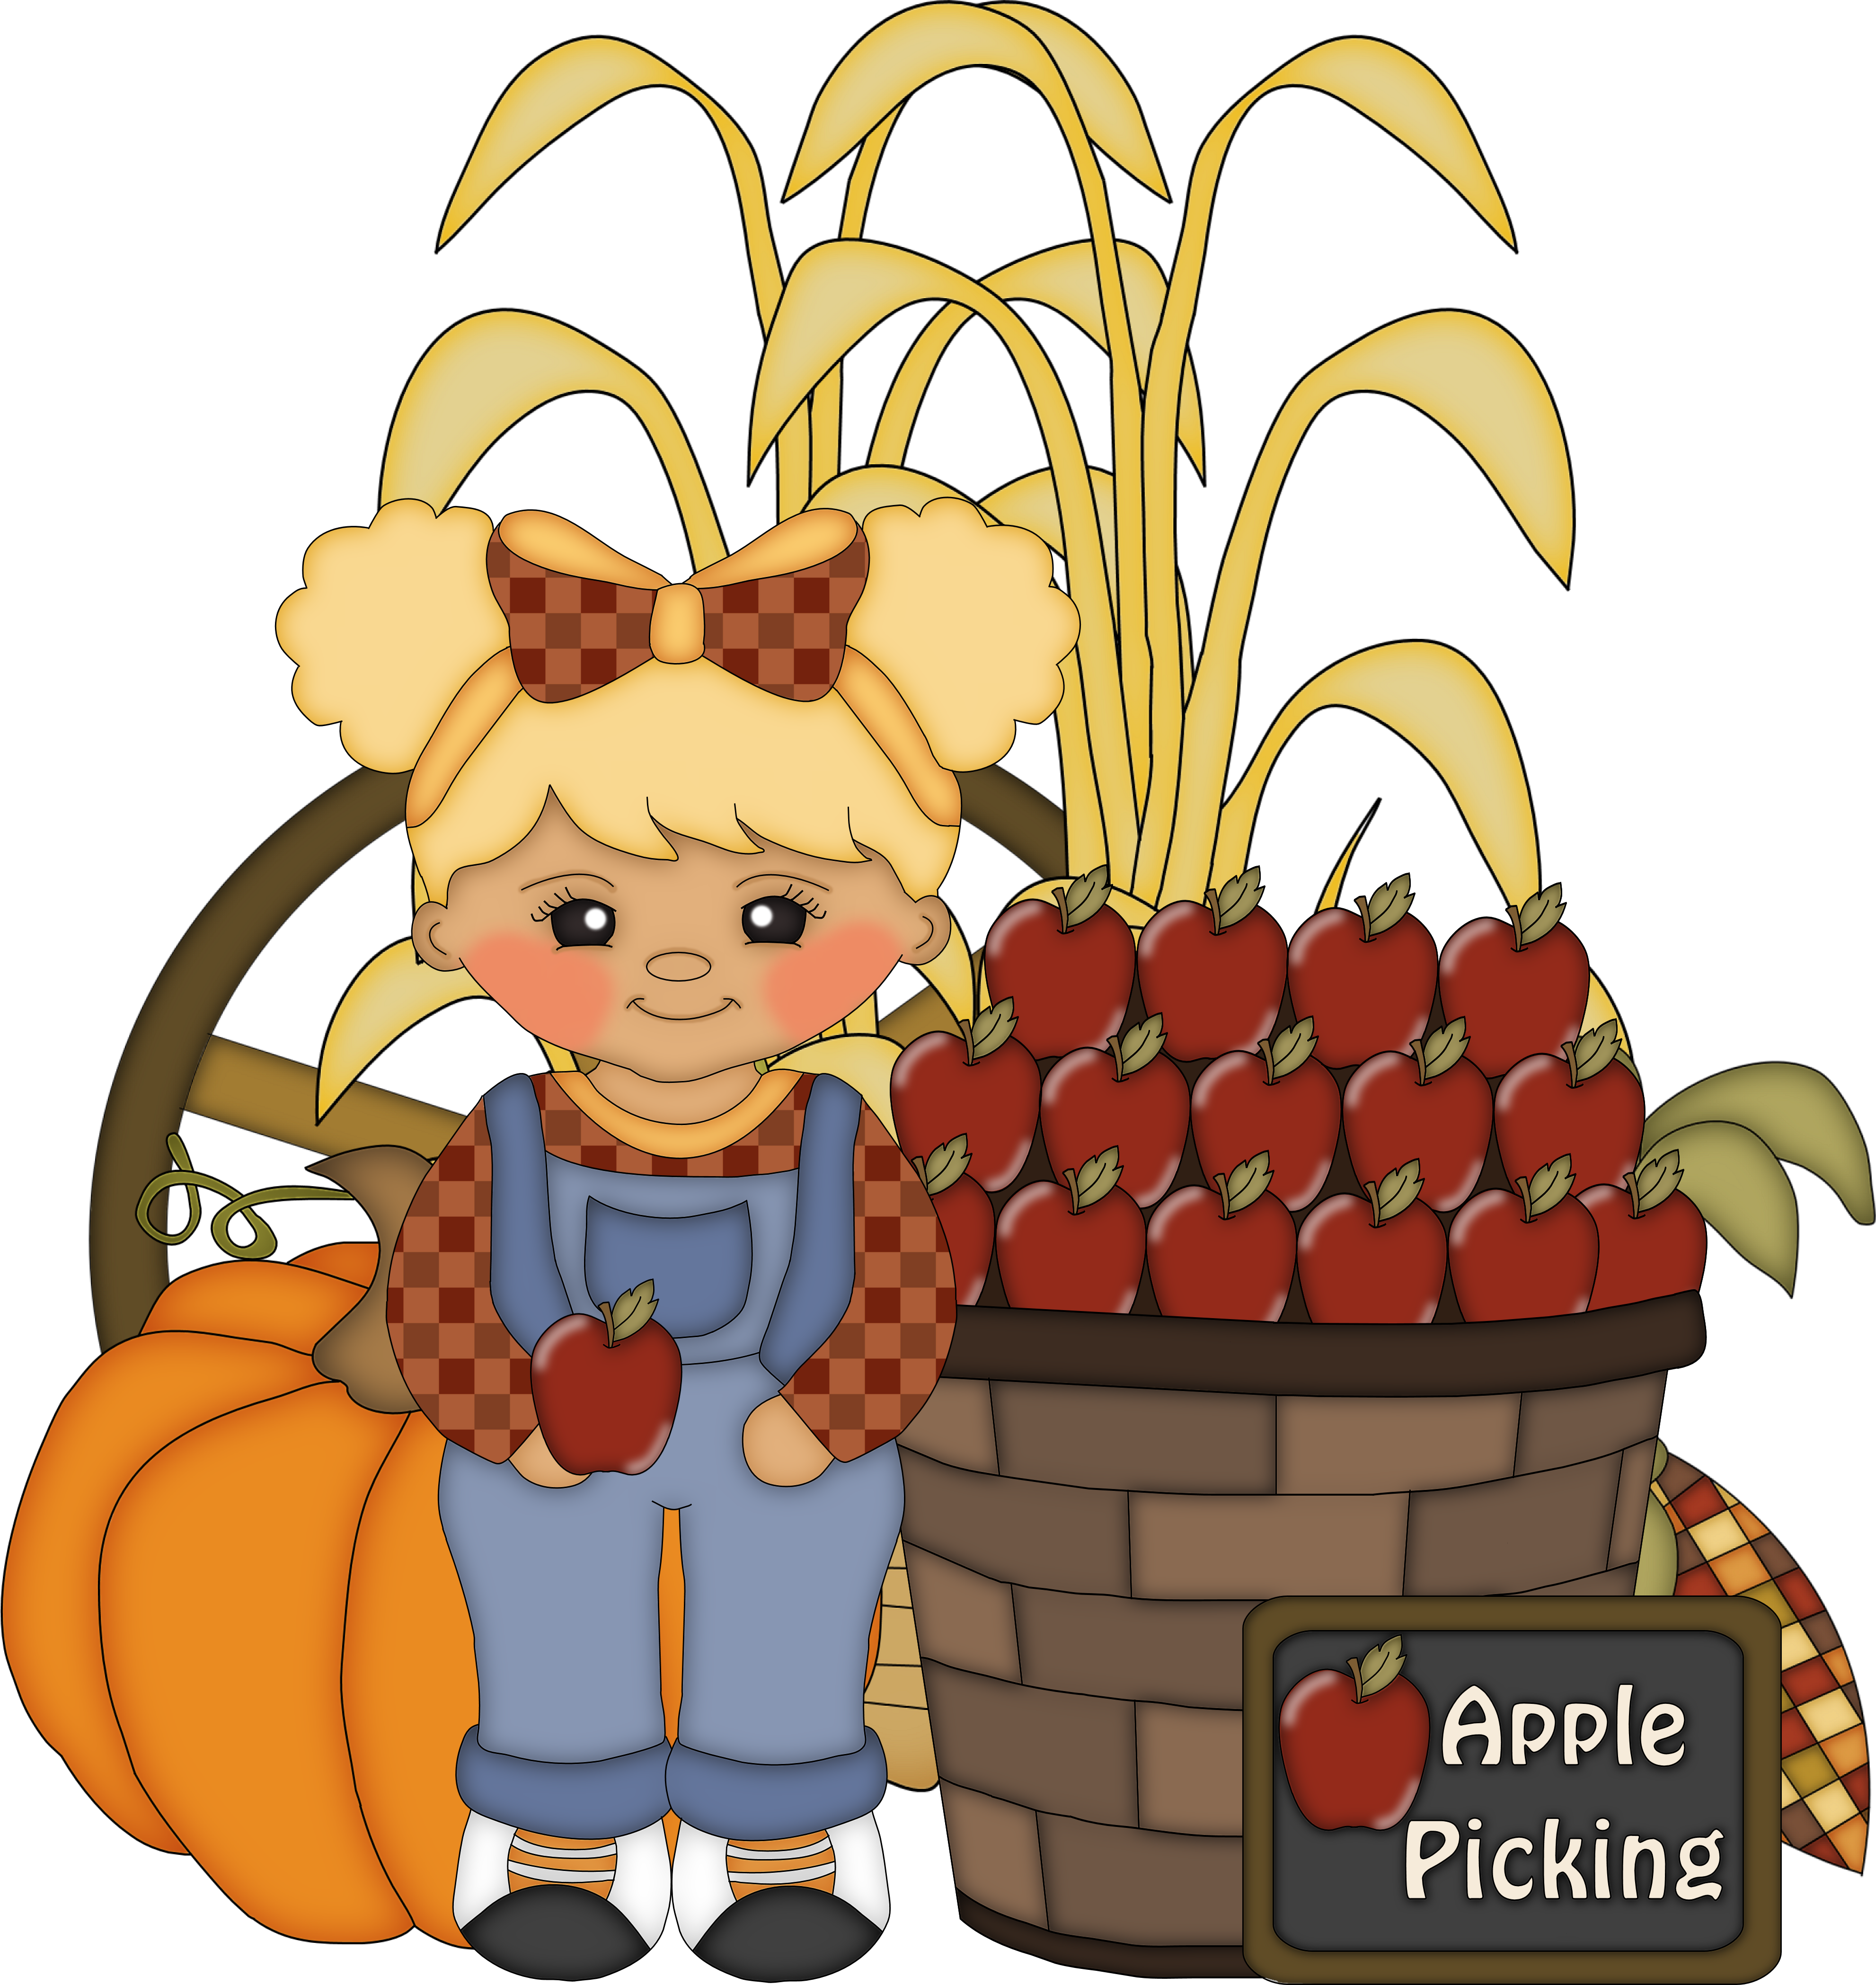 Fall Festival Girl - Autumn Design With Pumkins And Teddy Bear Magnet (3964x4194)